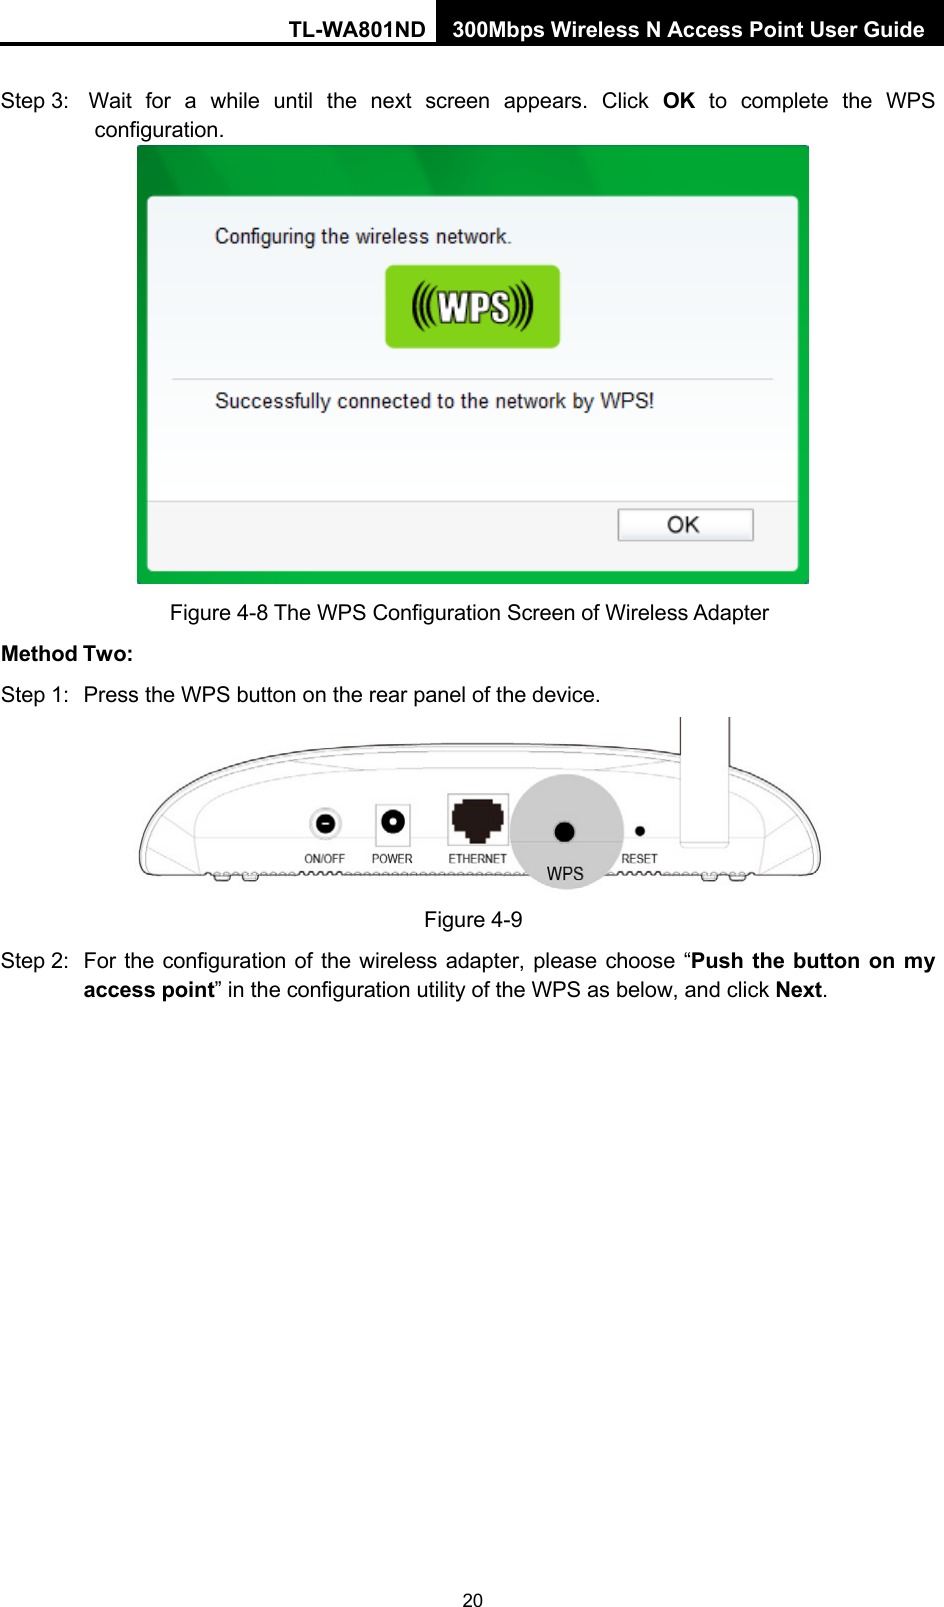 TL-WA801ND 300Mbps Wireless N Access Point User Guide 20    Step 3:   Wait  for  a  while  until  the  next  screen  appears.  Click  OK  to  complete  the  WPS configuration.     Method Two: Figure 4-8 The WPS Configuration Screen of Wireless Adapter Step 1:  Press the WPS button on the rear panel of the device.   Figure 4-9 Step 2:  For the configuration of the wireless adapter, please choose  “Push the button on my access point” in the configuration utility of the WPS as below, and click Next. 